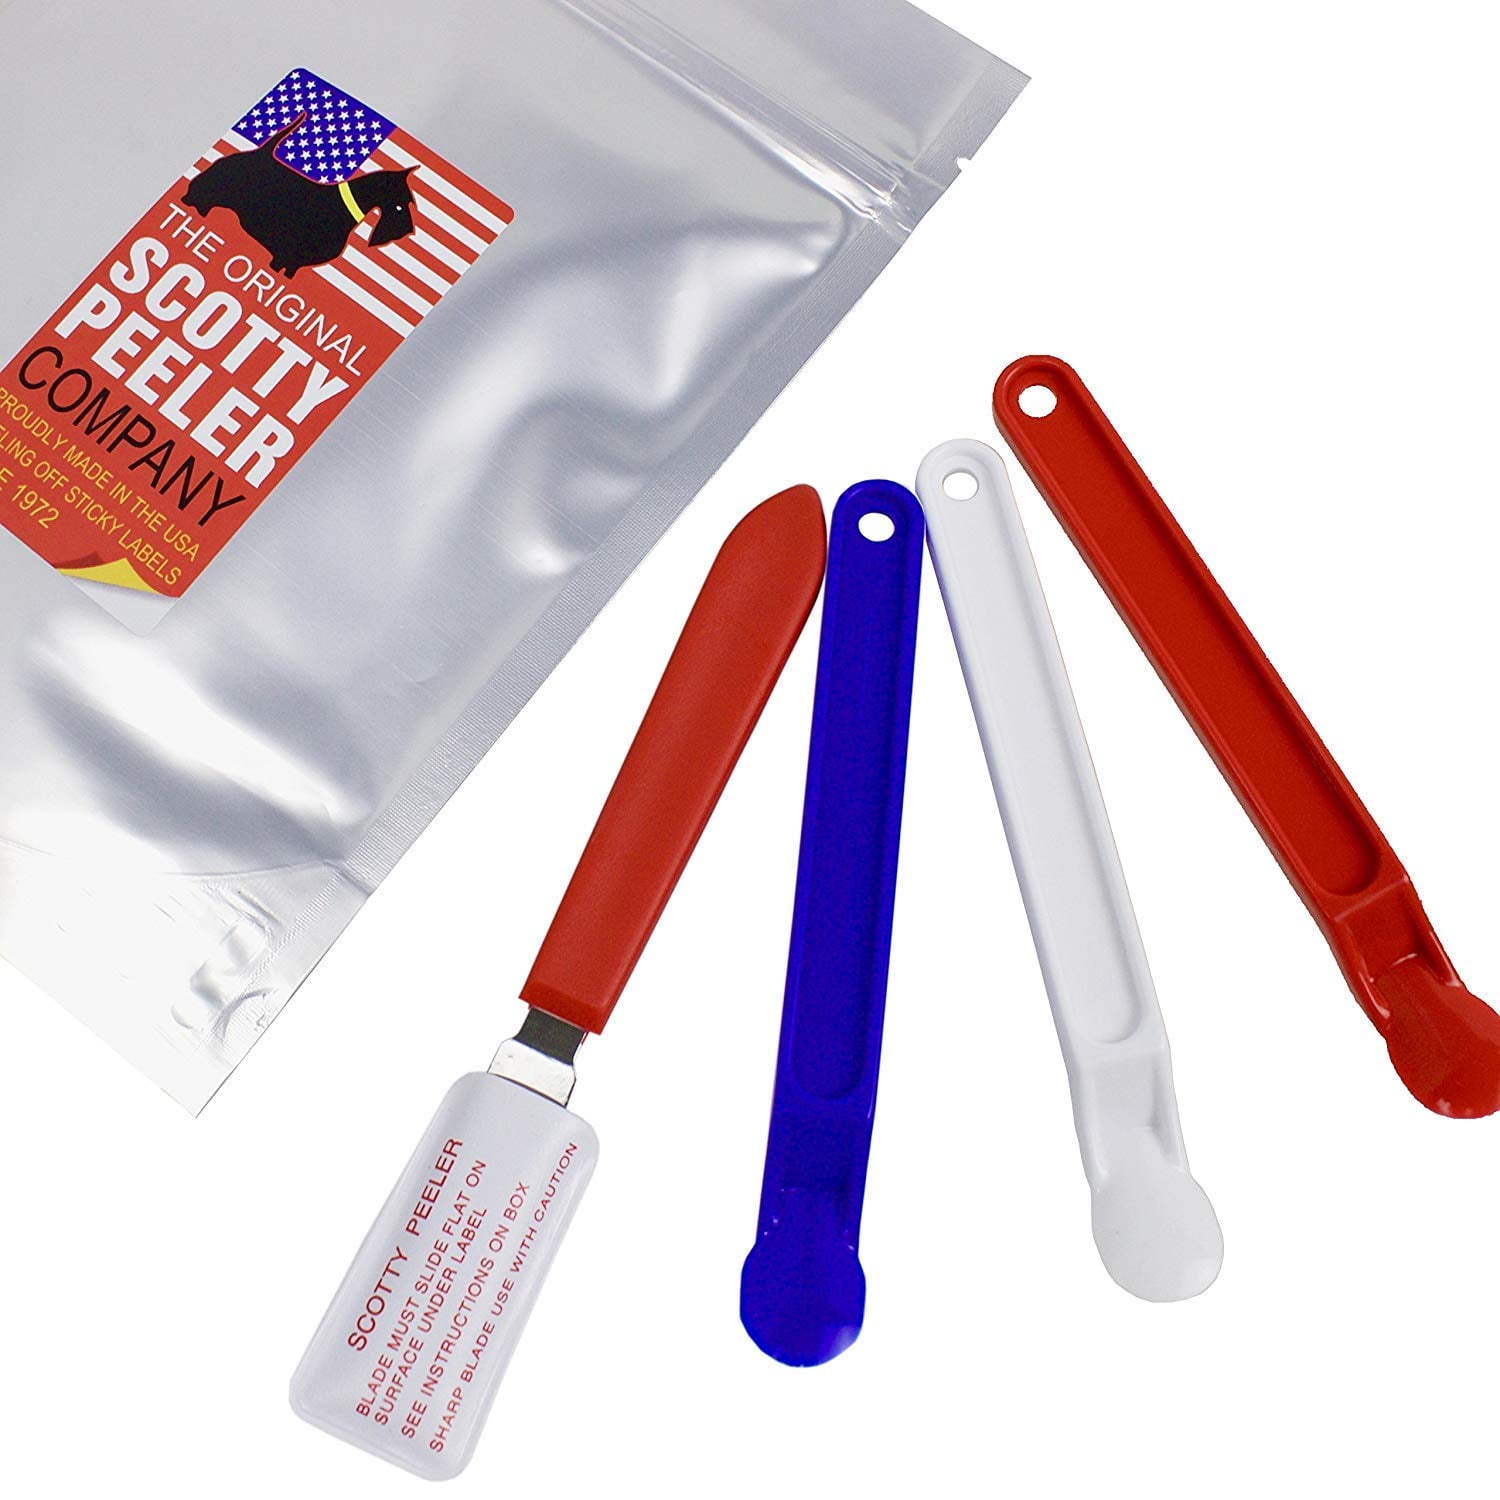 Buy Doc Edingtons Scotty Peeler 3 Pack. Pro-Grade Label Scraper/Sticker  Removal Tool Works Great & is Safer Than Razor Blade Scrapers. Use This  Plastic Scraper With Our Adhesive Remover for Best Results.